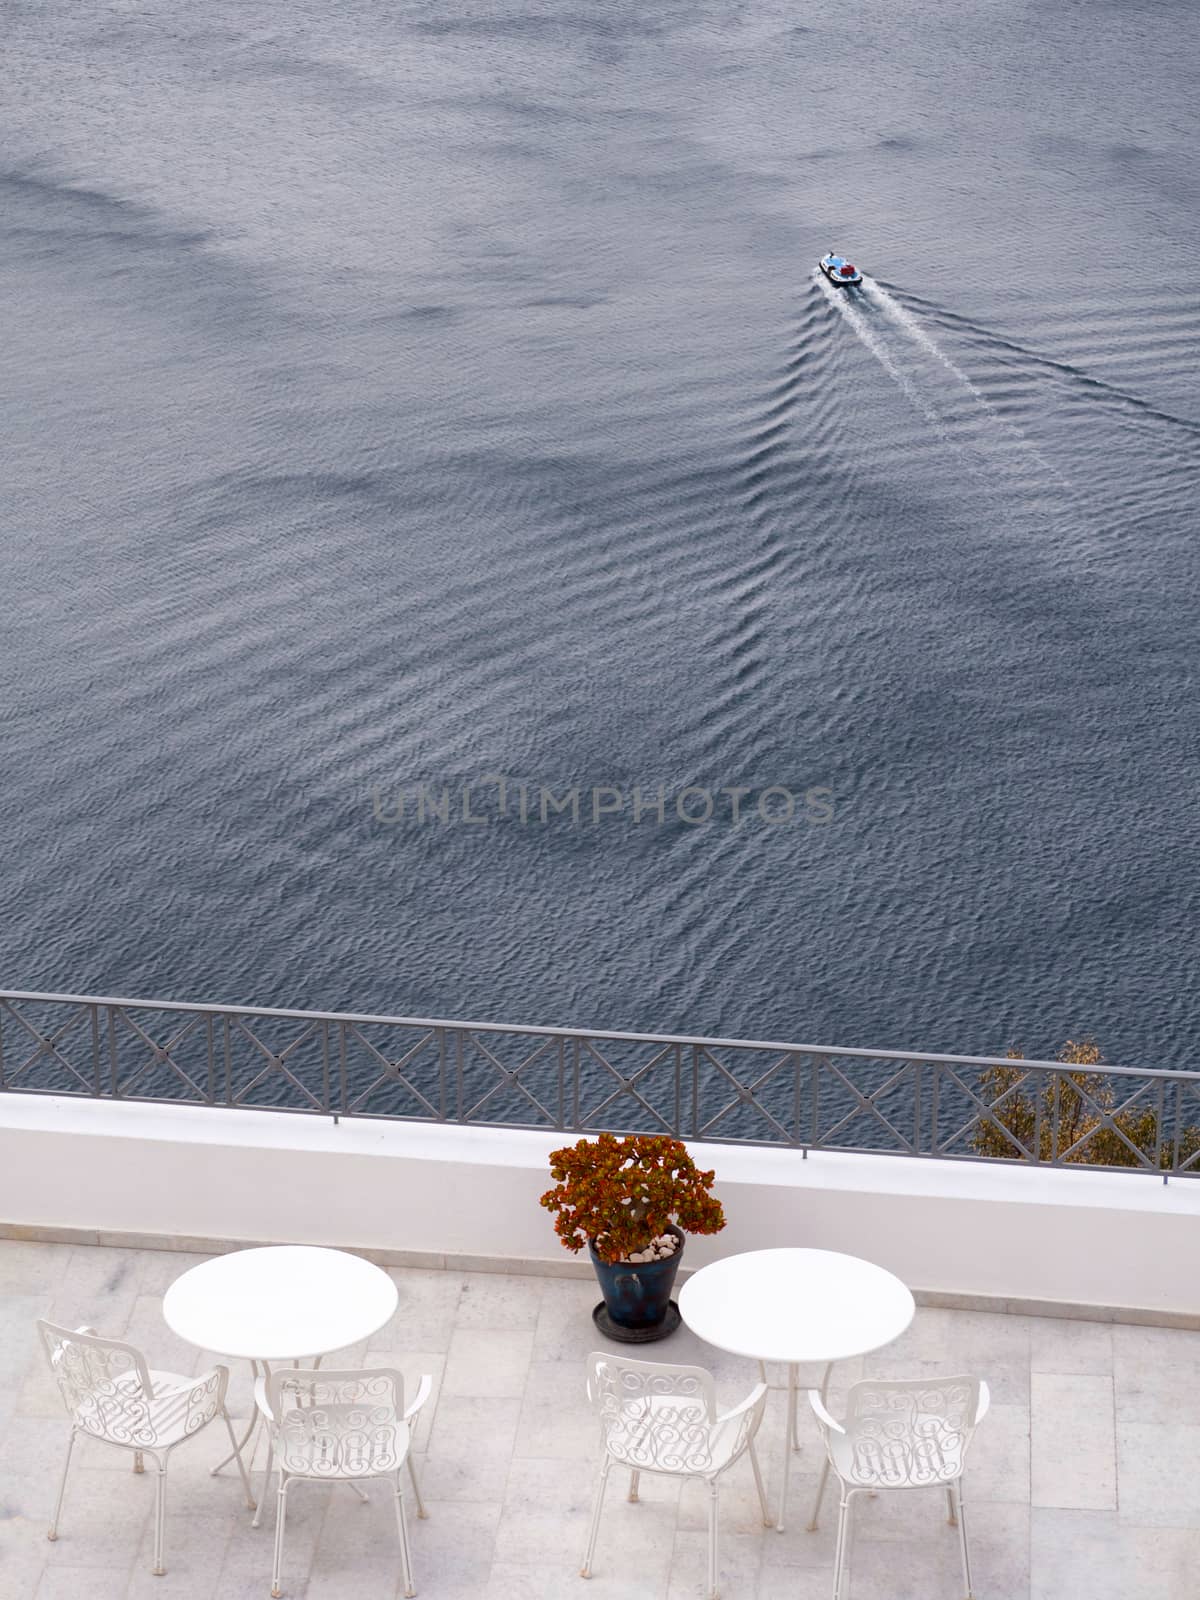 Balcony with tables and sea view with a boat passing in the background